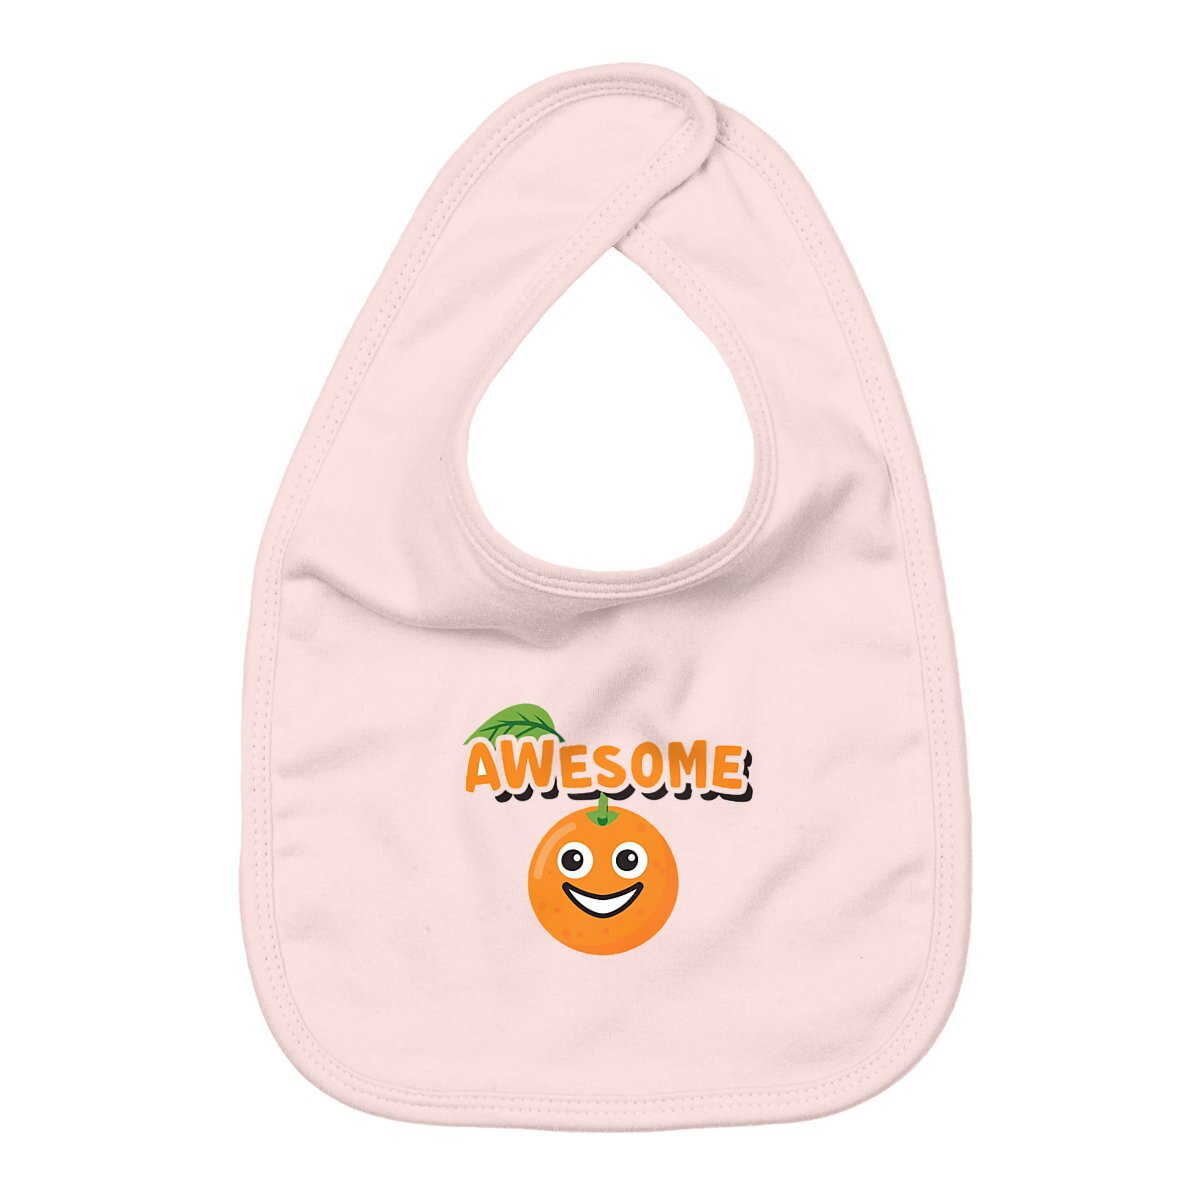 Orange Awesome Organic Cotton Graphic Baby Bib | Hypoallergenic - Allergy Friendly - Naturally Free